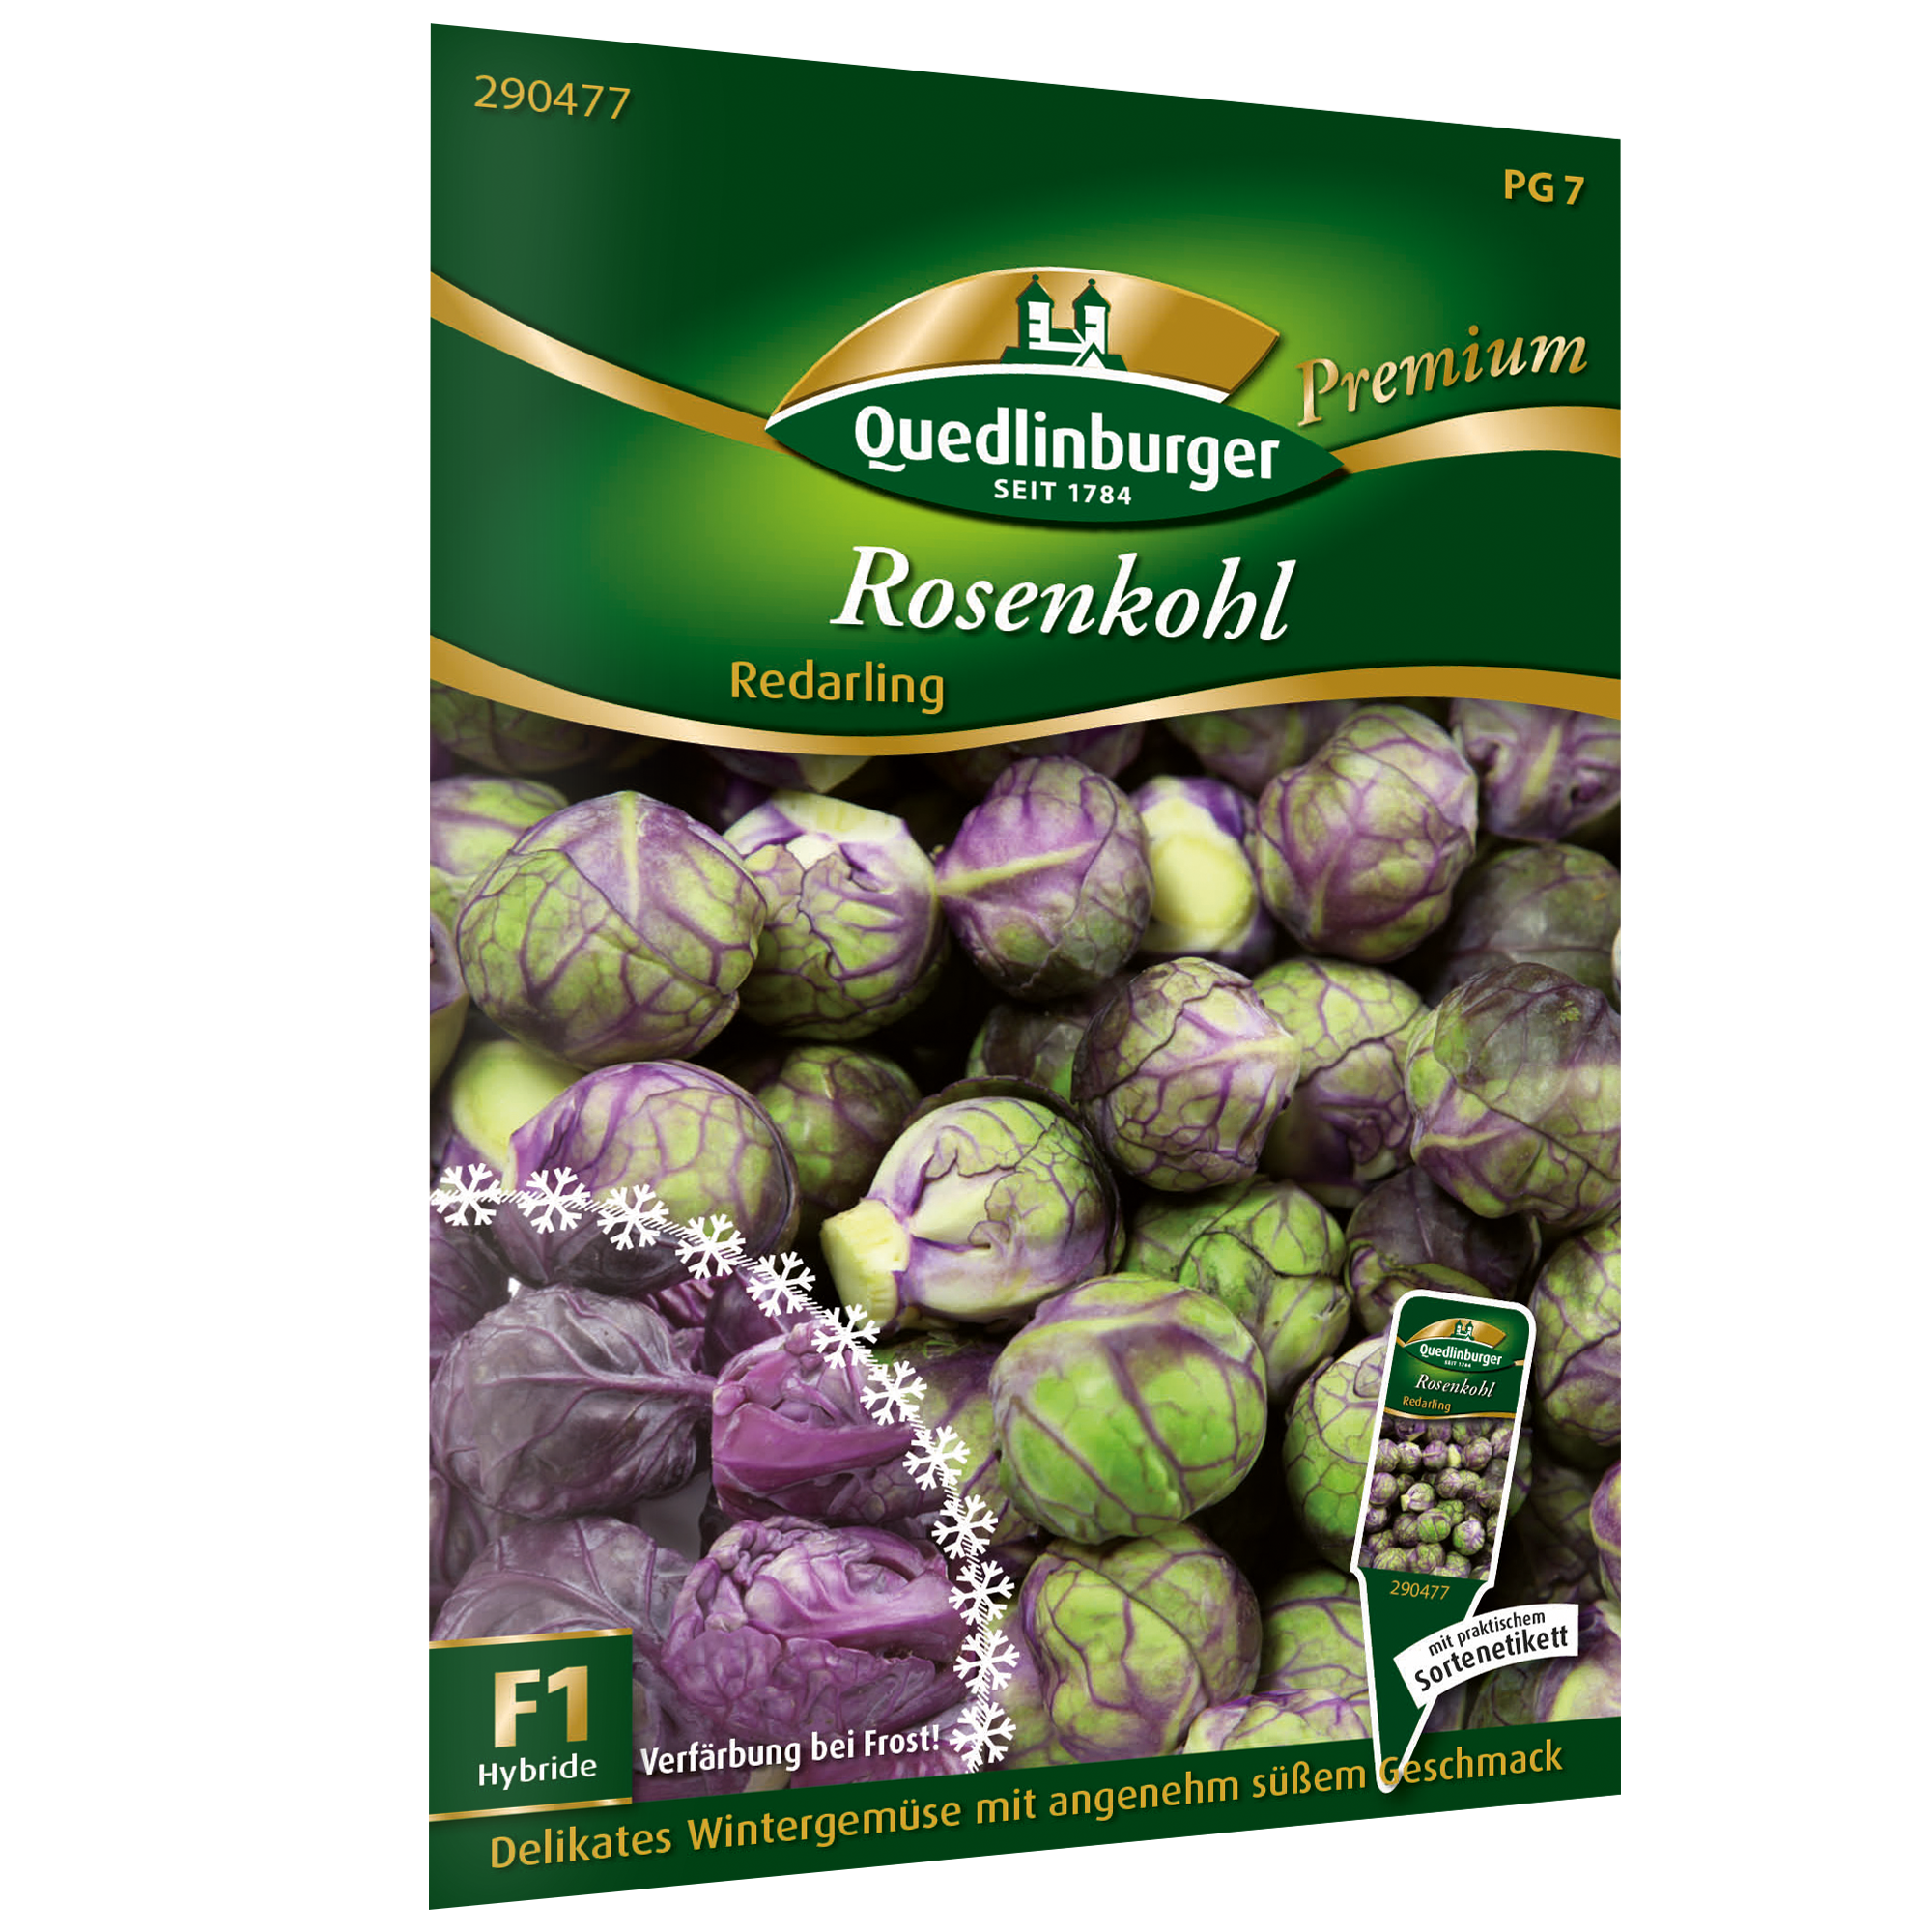 Rosenkohl 'Redarling' + product picture